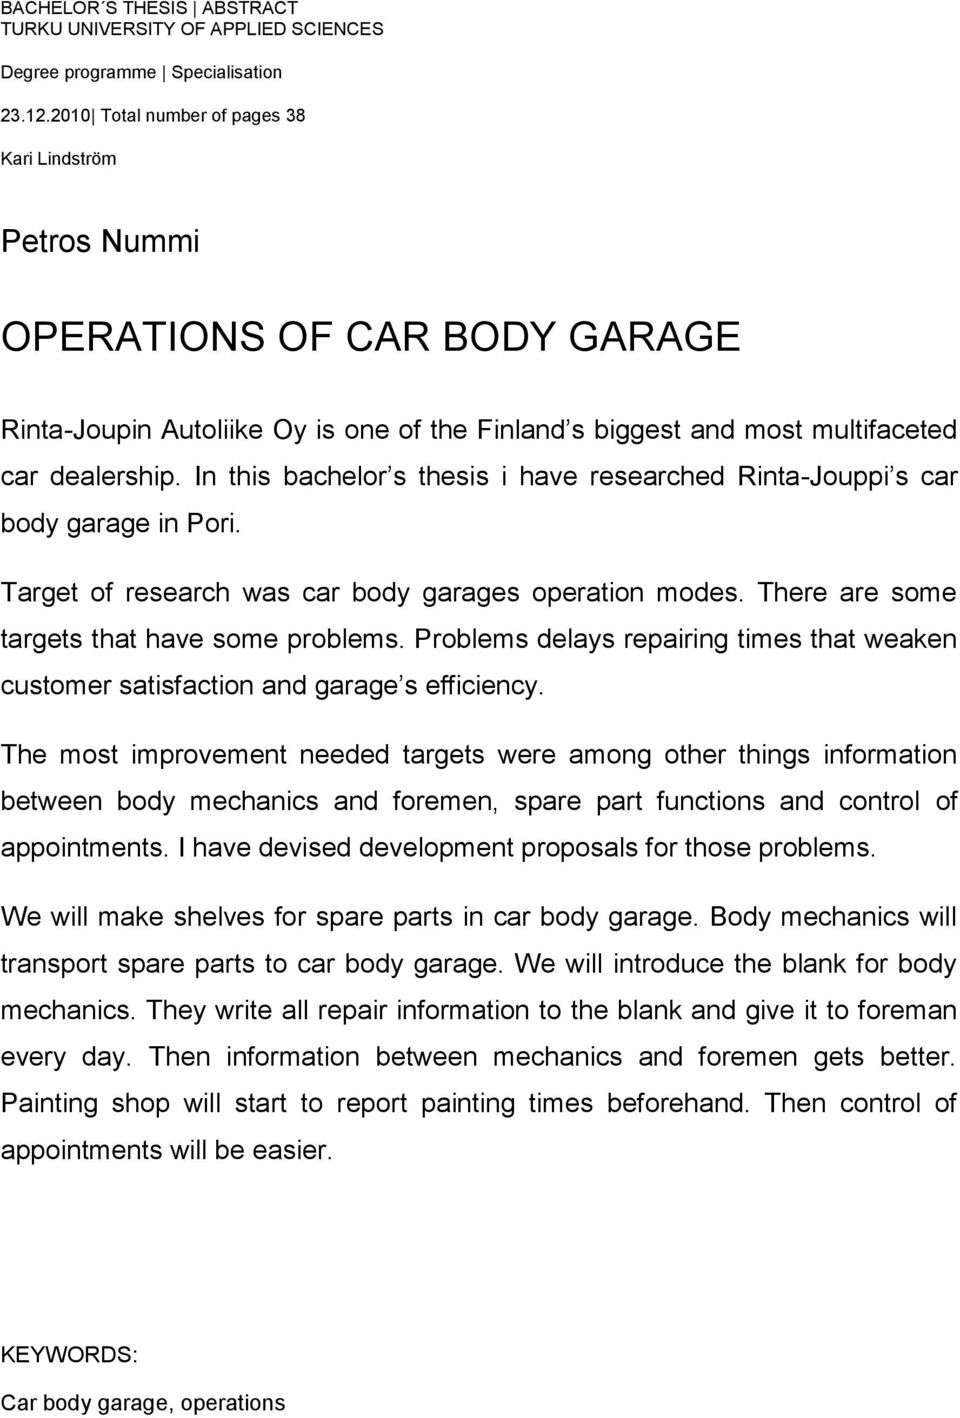 In this bachelor s thesis i have researched Rinta-Jouppi s car body garage in Pori. Target of research was car body garages operation modes. There are some targets that have some problems.